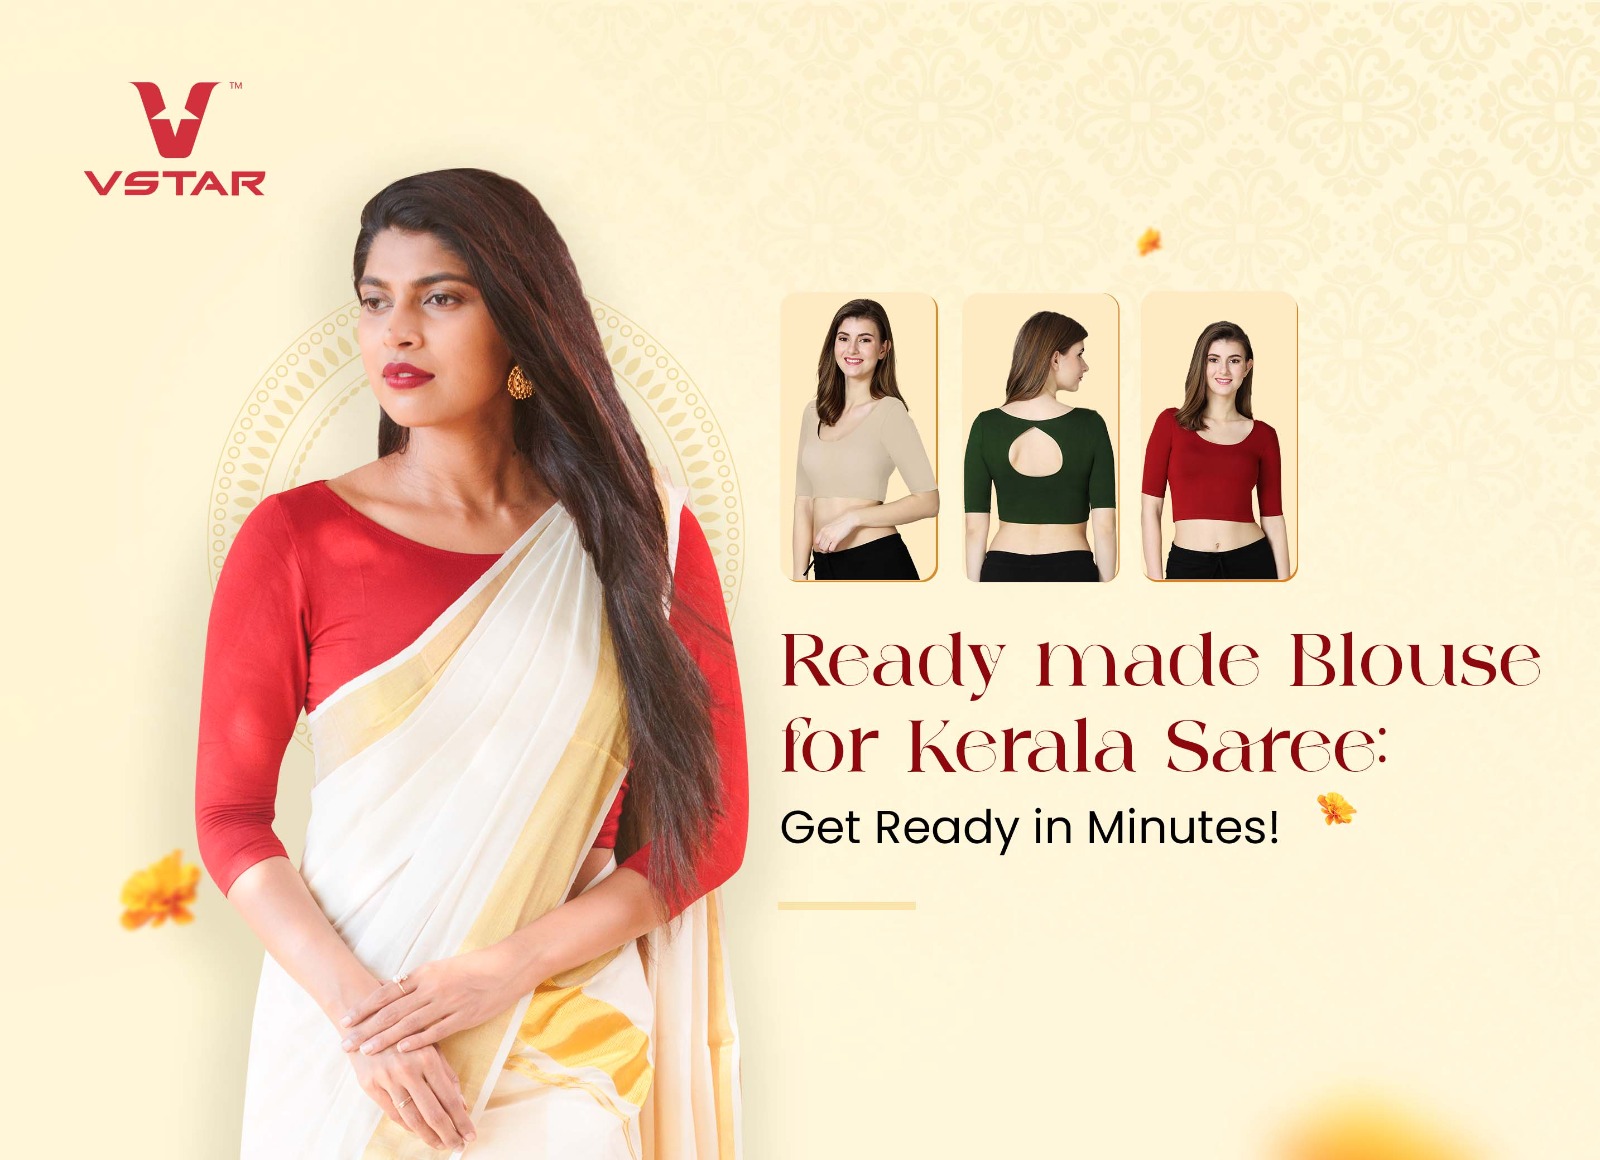 Readymade Blouse for Kerala Saree: Get Ready in Minutes with VStar